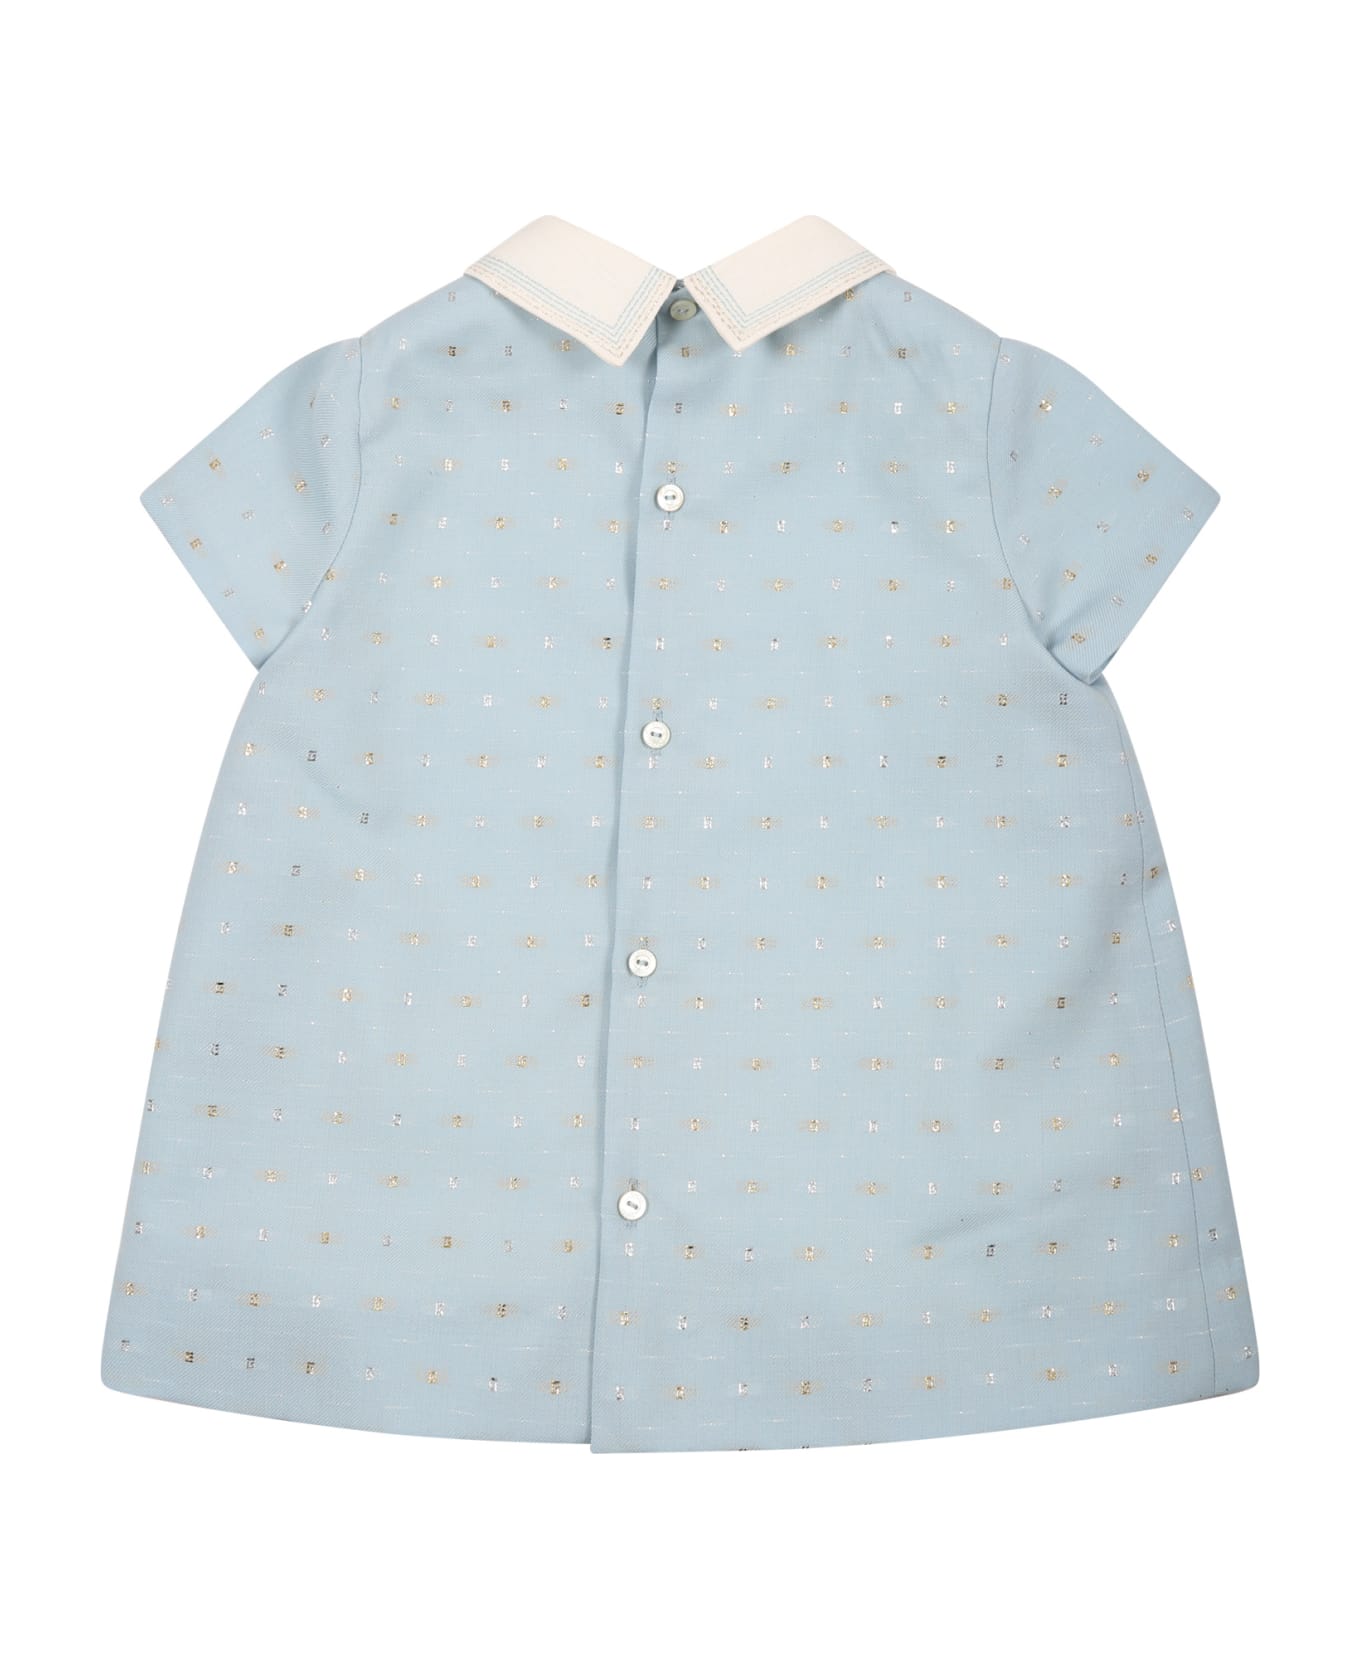 Gucci Light Blue Dress For Baby Girl With Gg - Light Blue